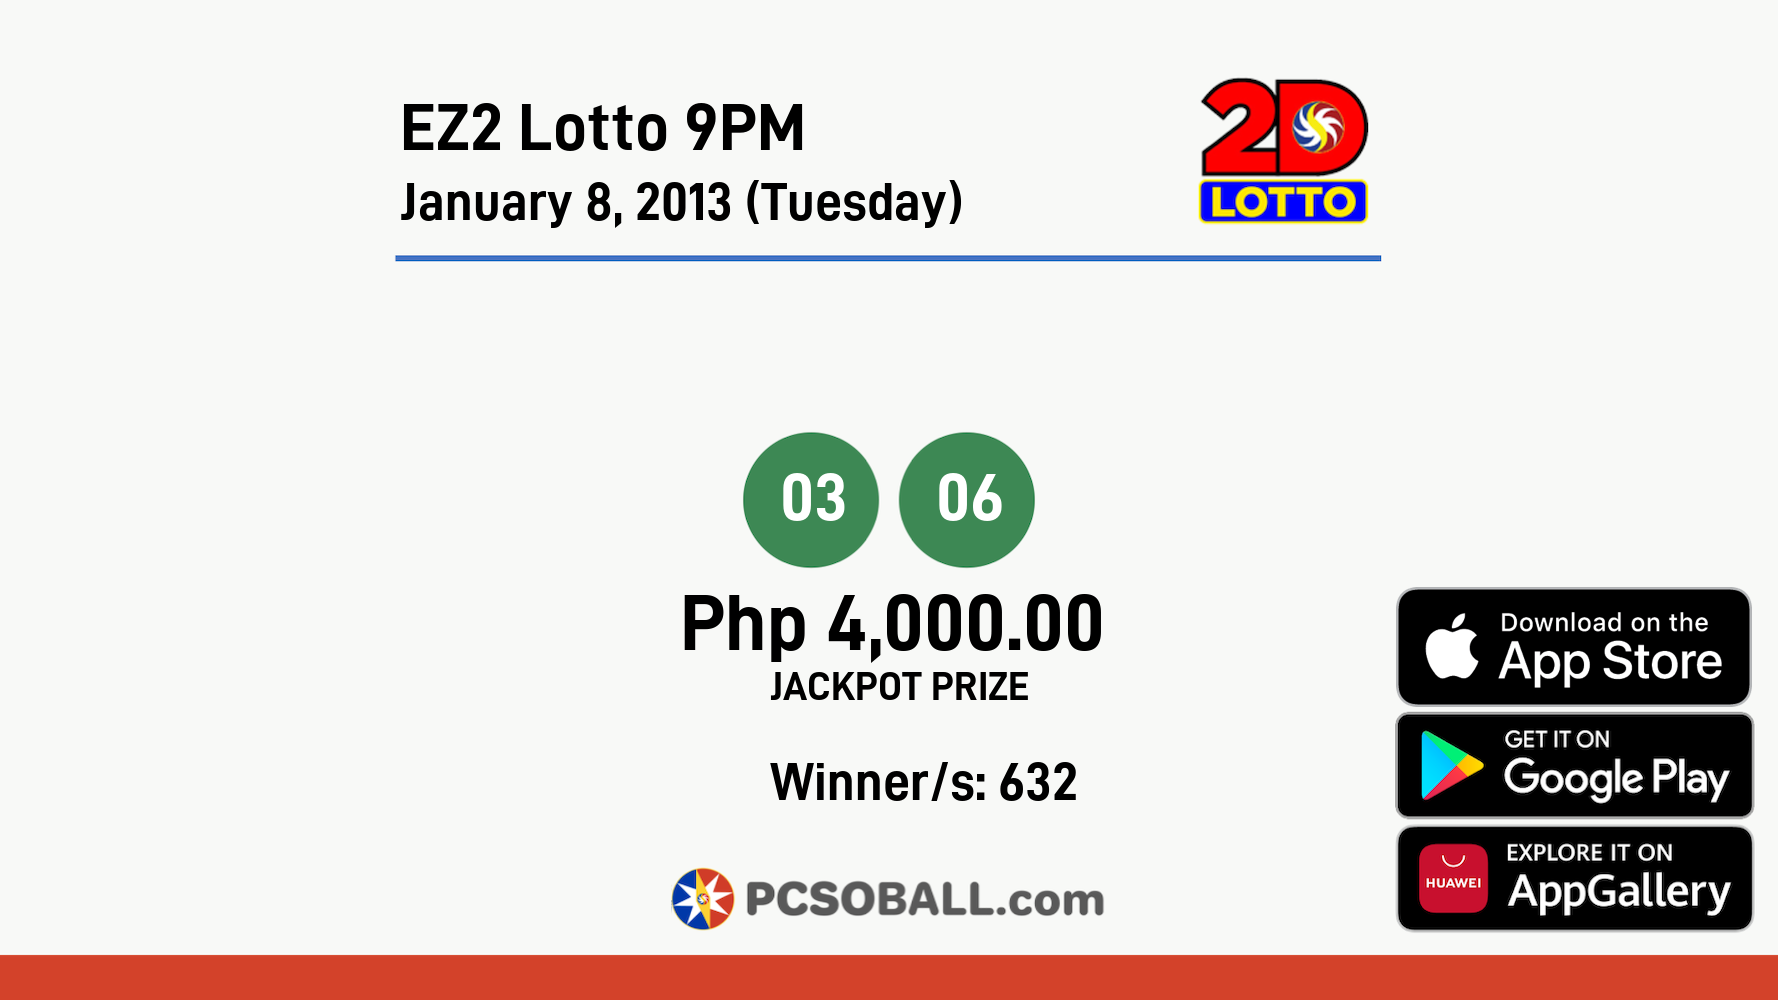 EZ2 Lotto 9PM January 8, 2013 (Tuesday) Result